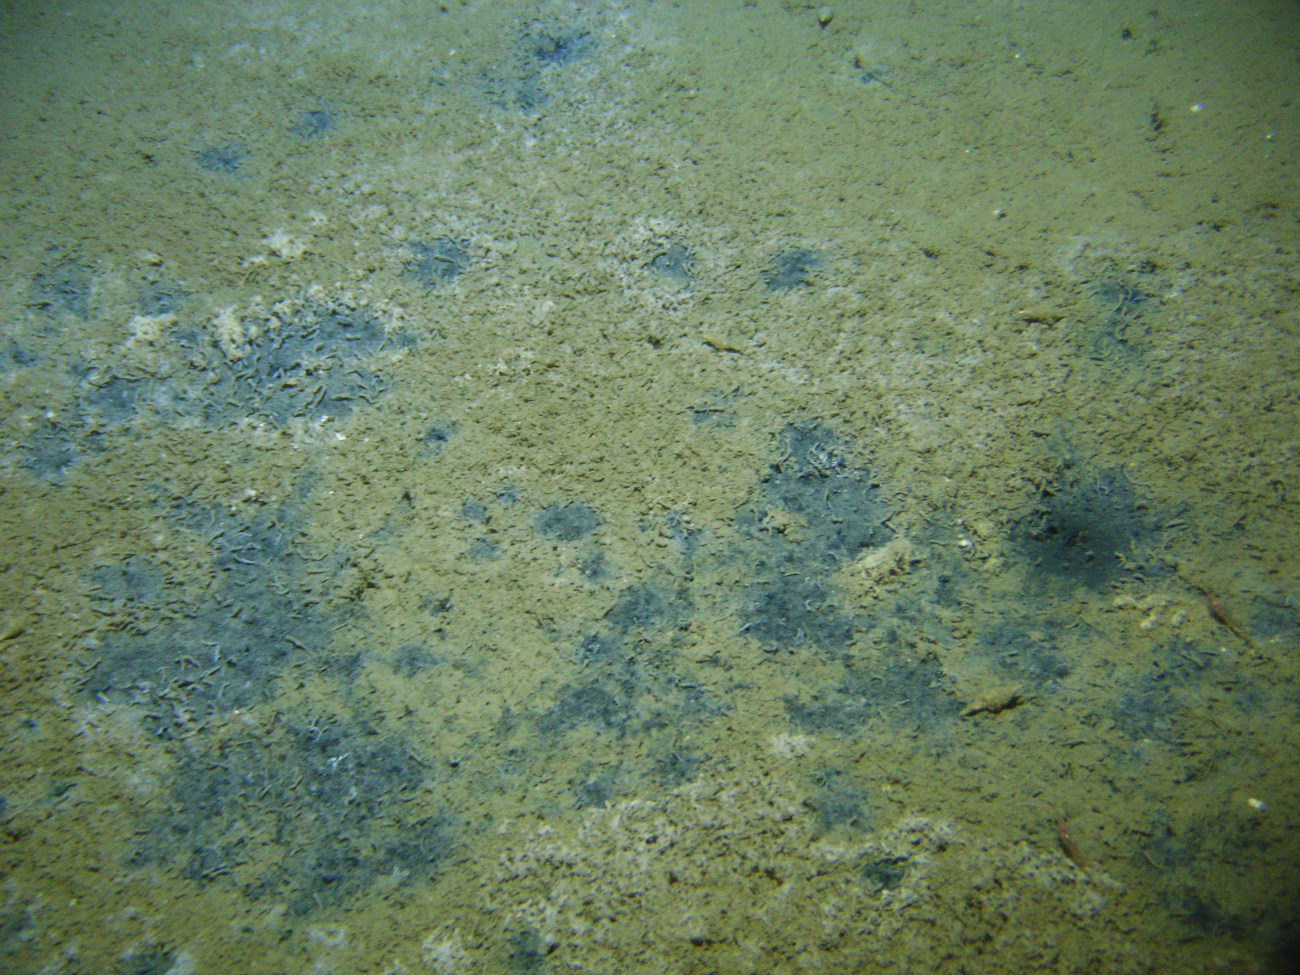 Small tube worms, two shrimp, and a gastropod are seen at a cold seep site